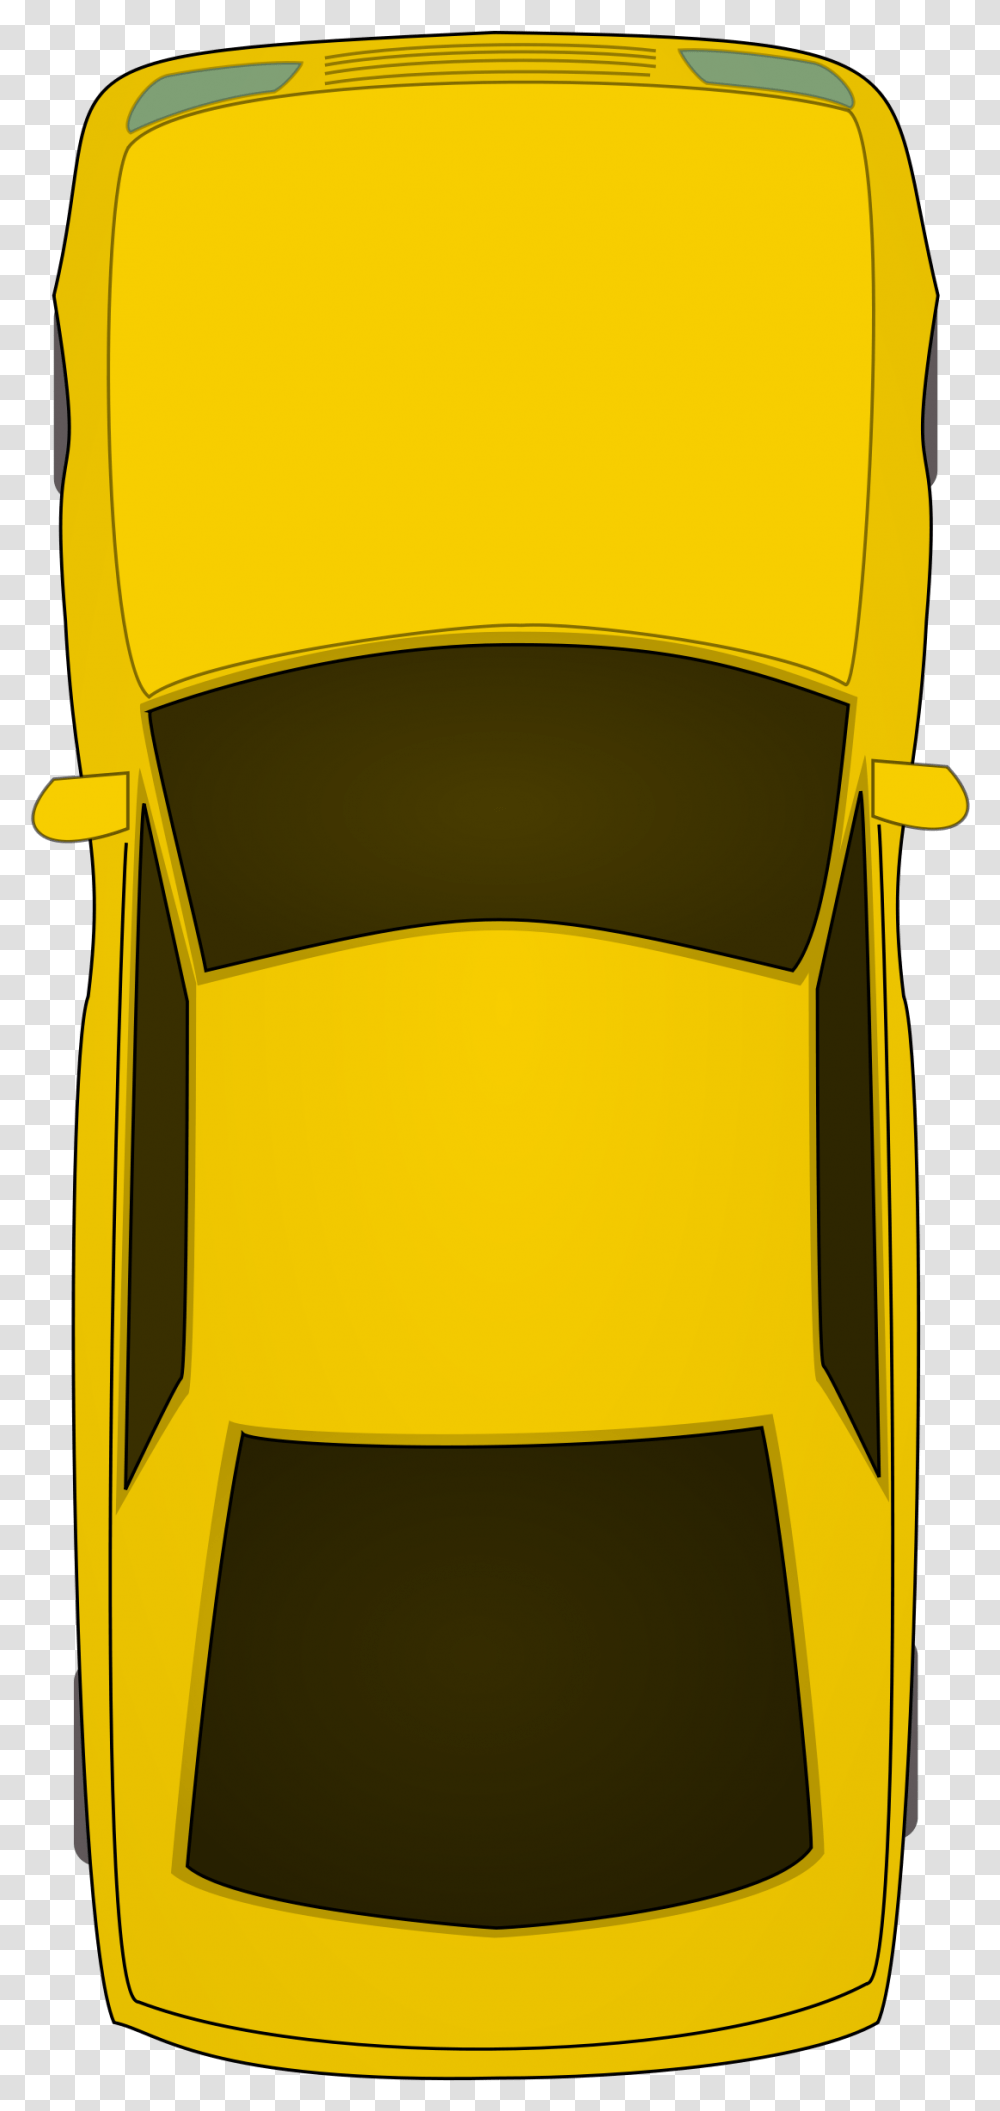 Car Drawing At Getdrawings Car From The Top, Bag, Scroll, Backpack, Label Transparent Png